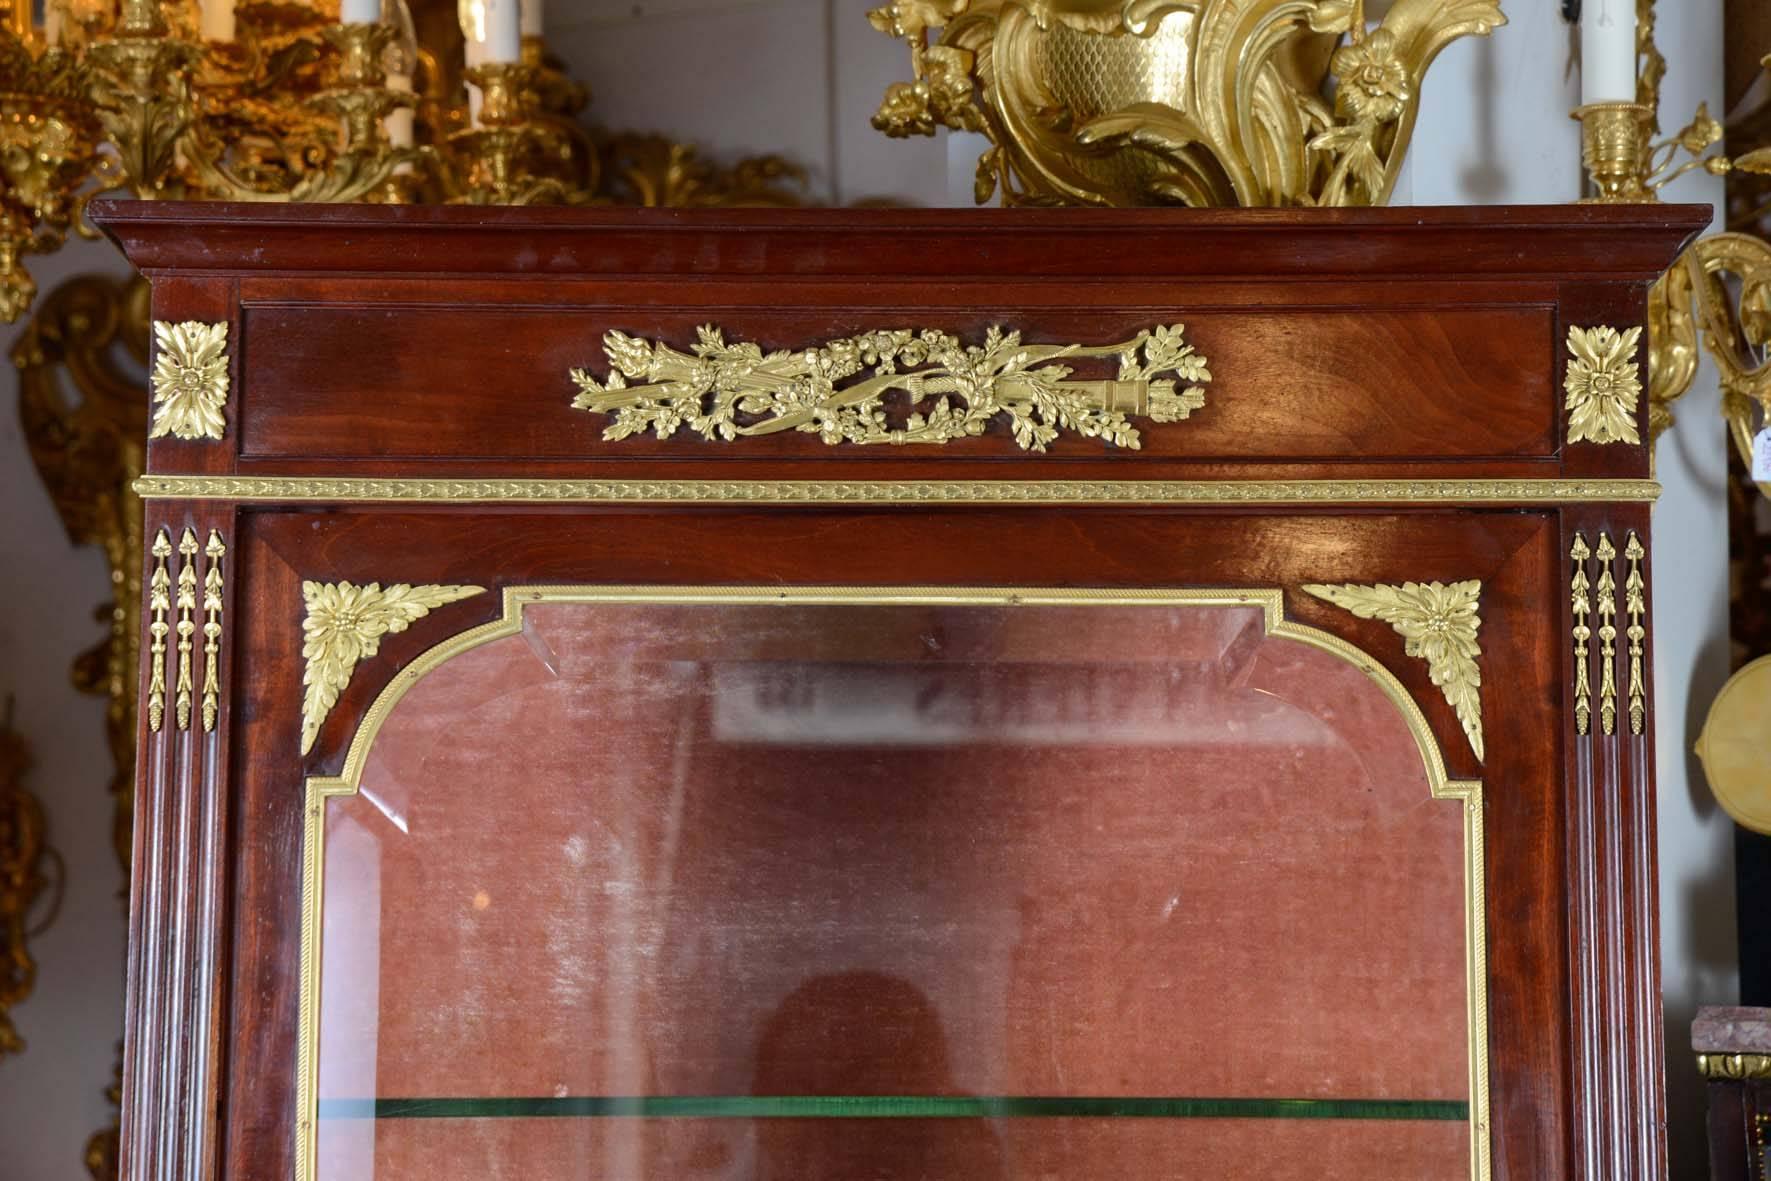 Vitrine in the style of Louis XVI mahogany decorated with gilt bronze.
It's exist a similar model by Weissweiller, in Versailles.